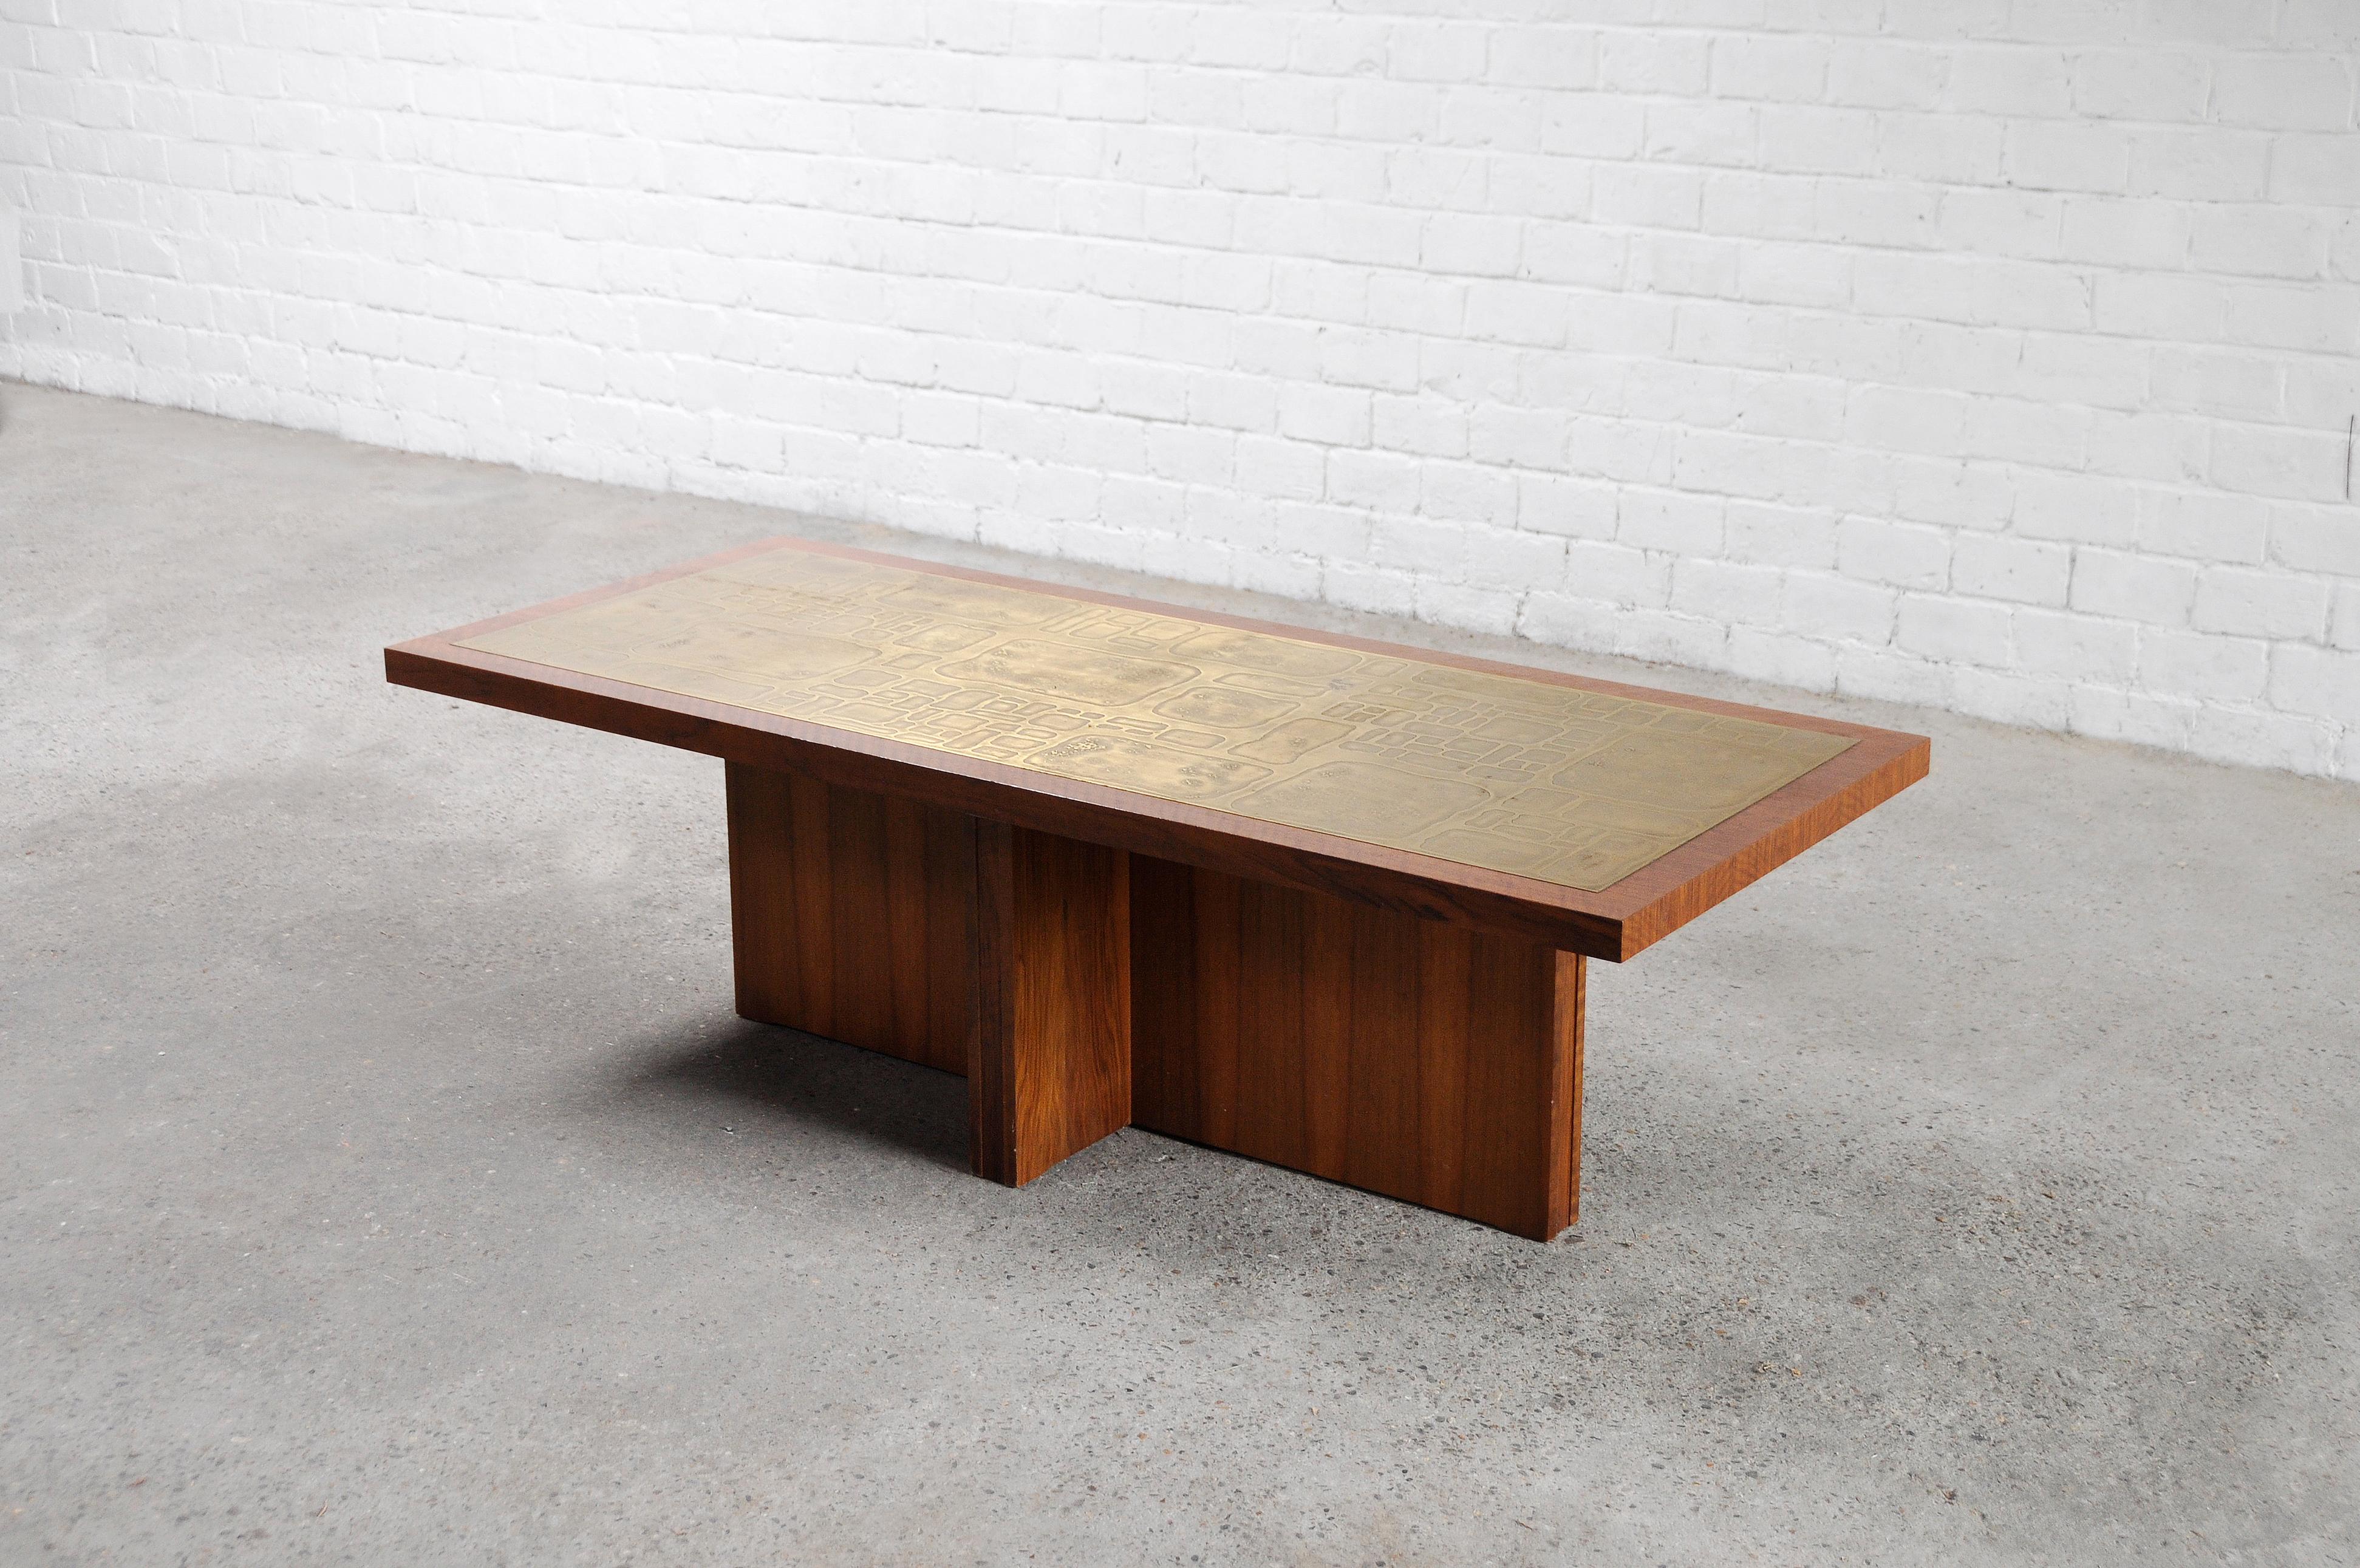 An impressive vintage coffee table designed by Bernard Rohne, crafted in the 1960's. This unique piece features a warm walnut wood base with an eye-catching large etched copper plate on top, representing the essence of modernist and Mid-century